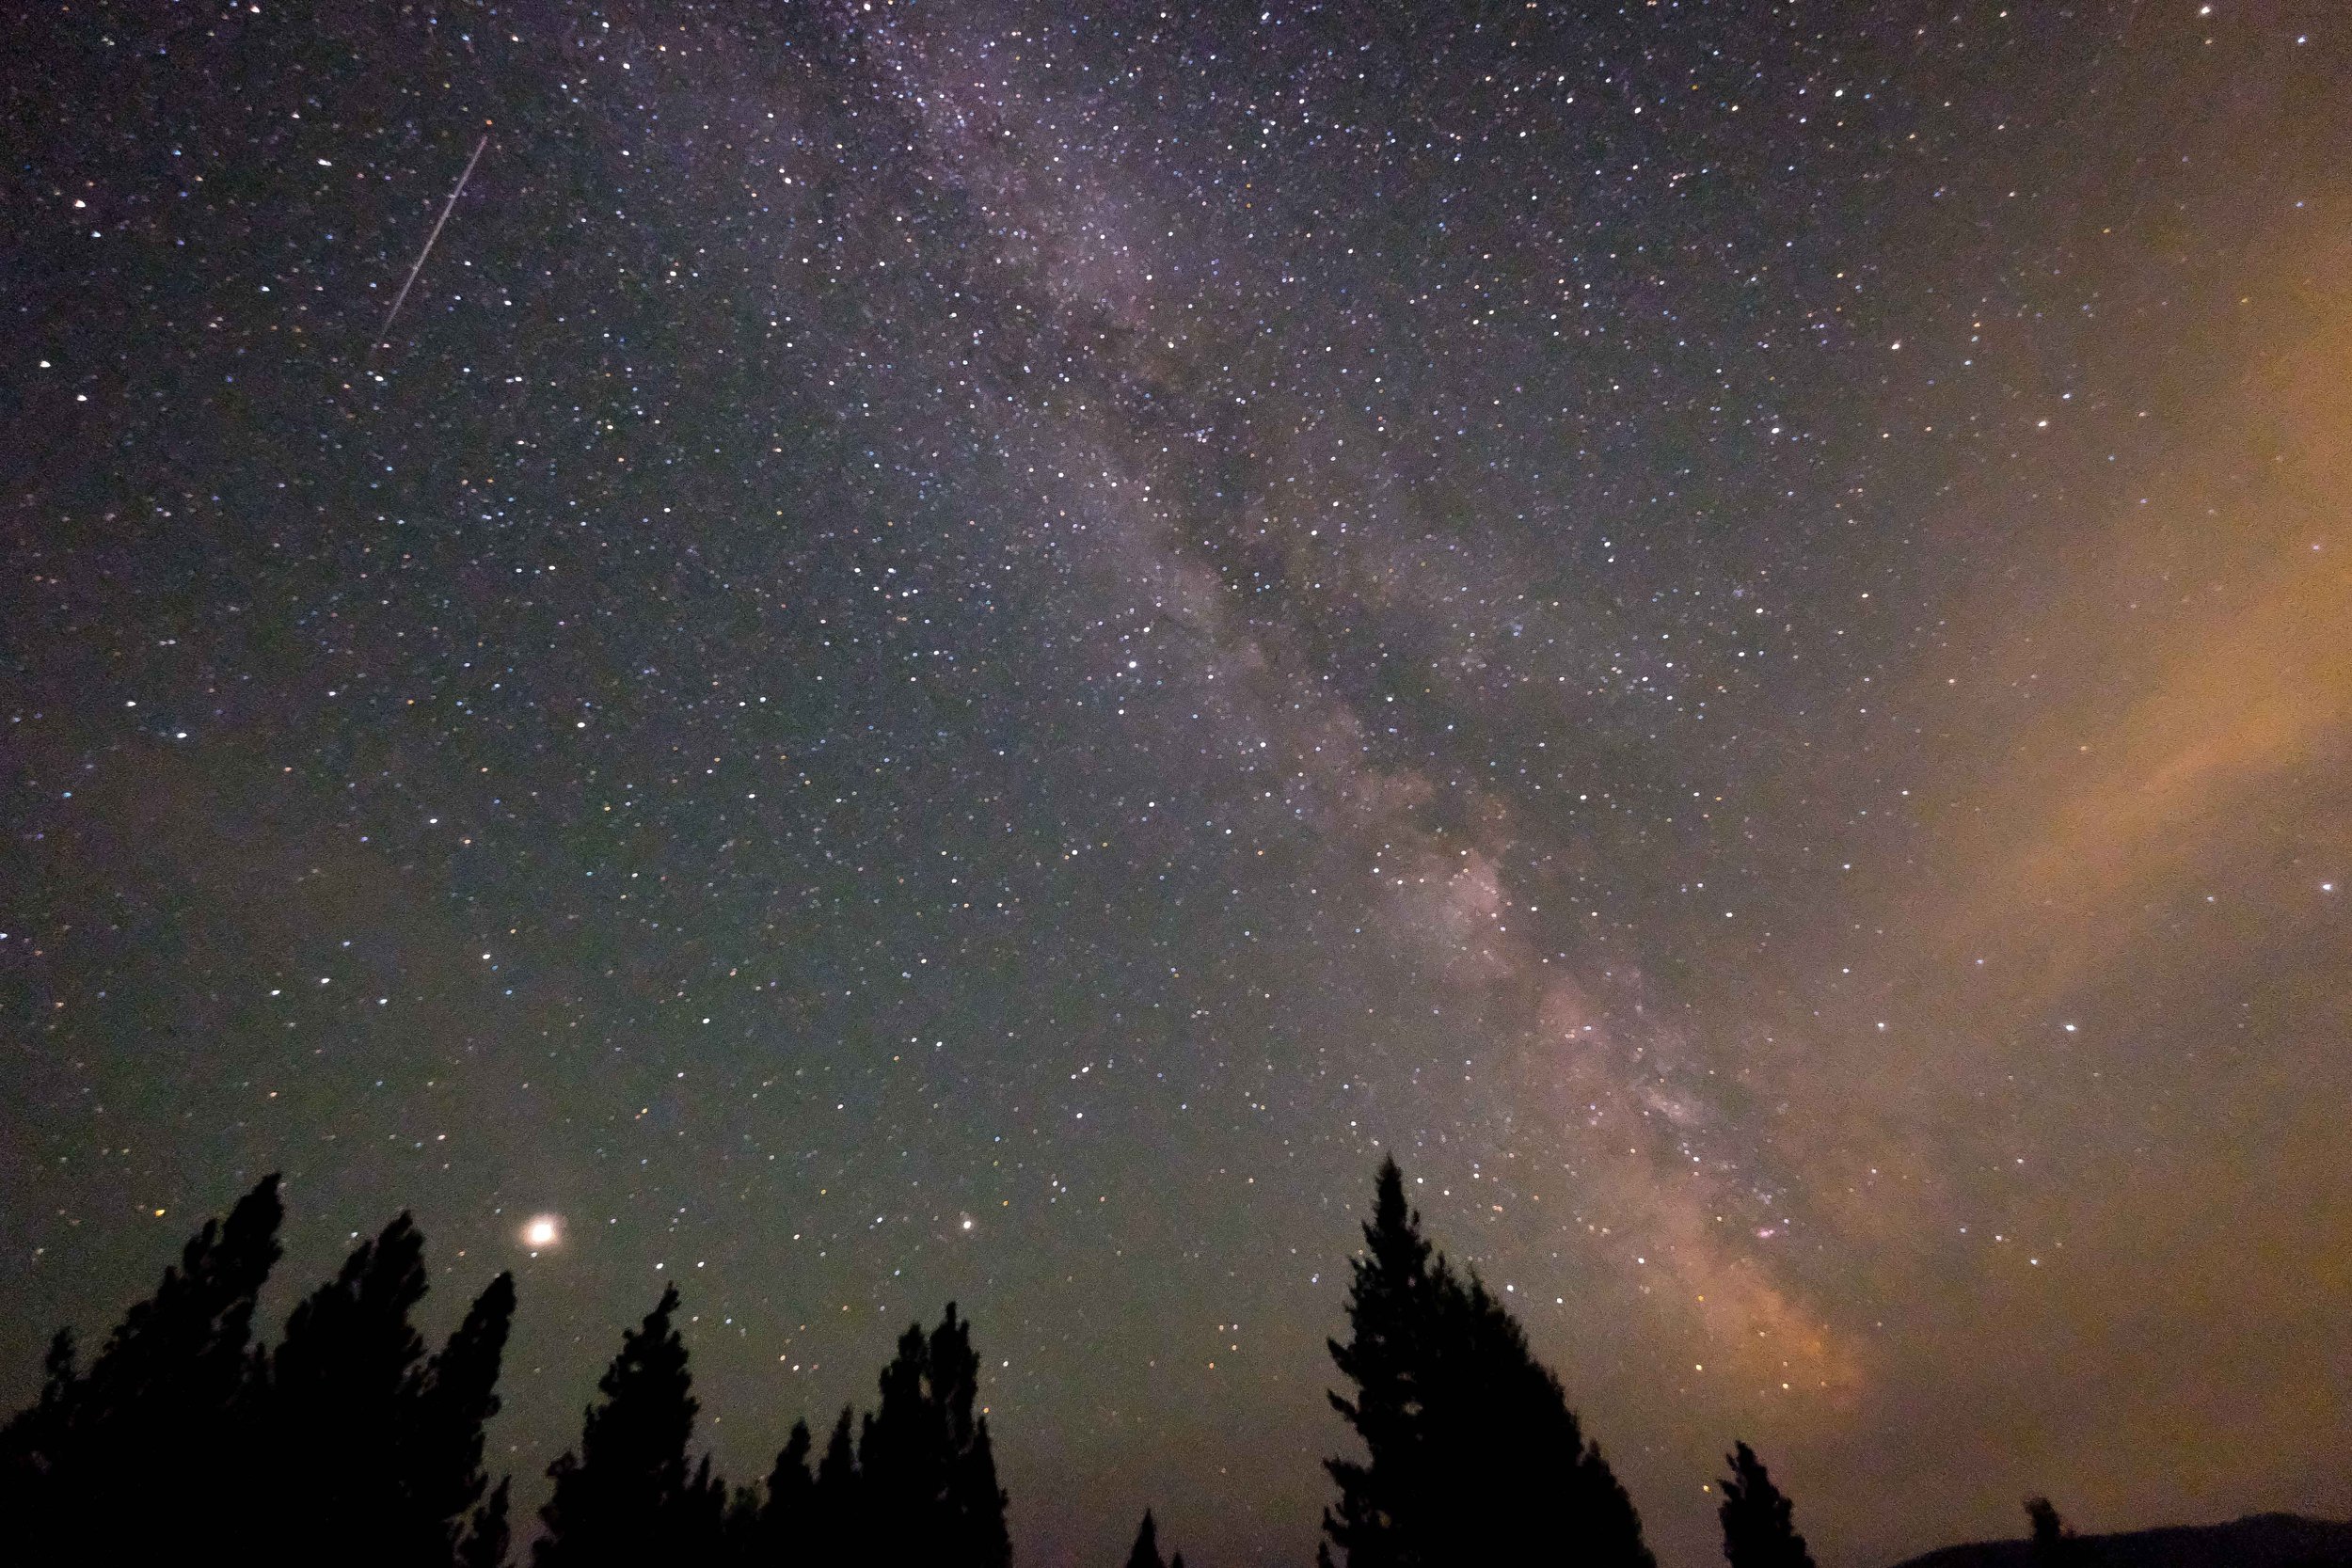 Stargazing and viewing the Milky Way are easy to do from inside or outside your cabins.